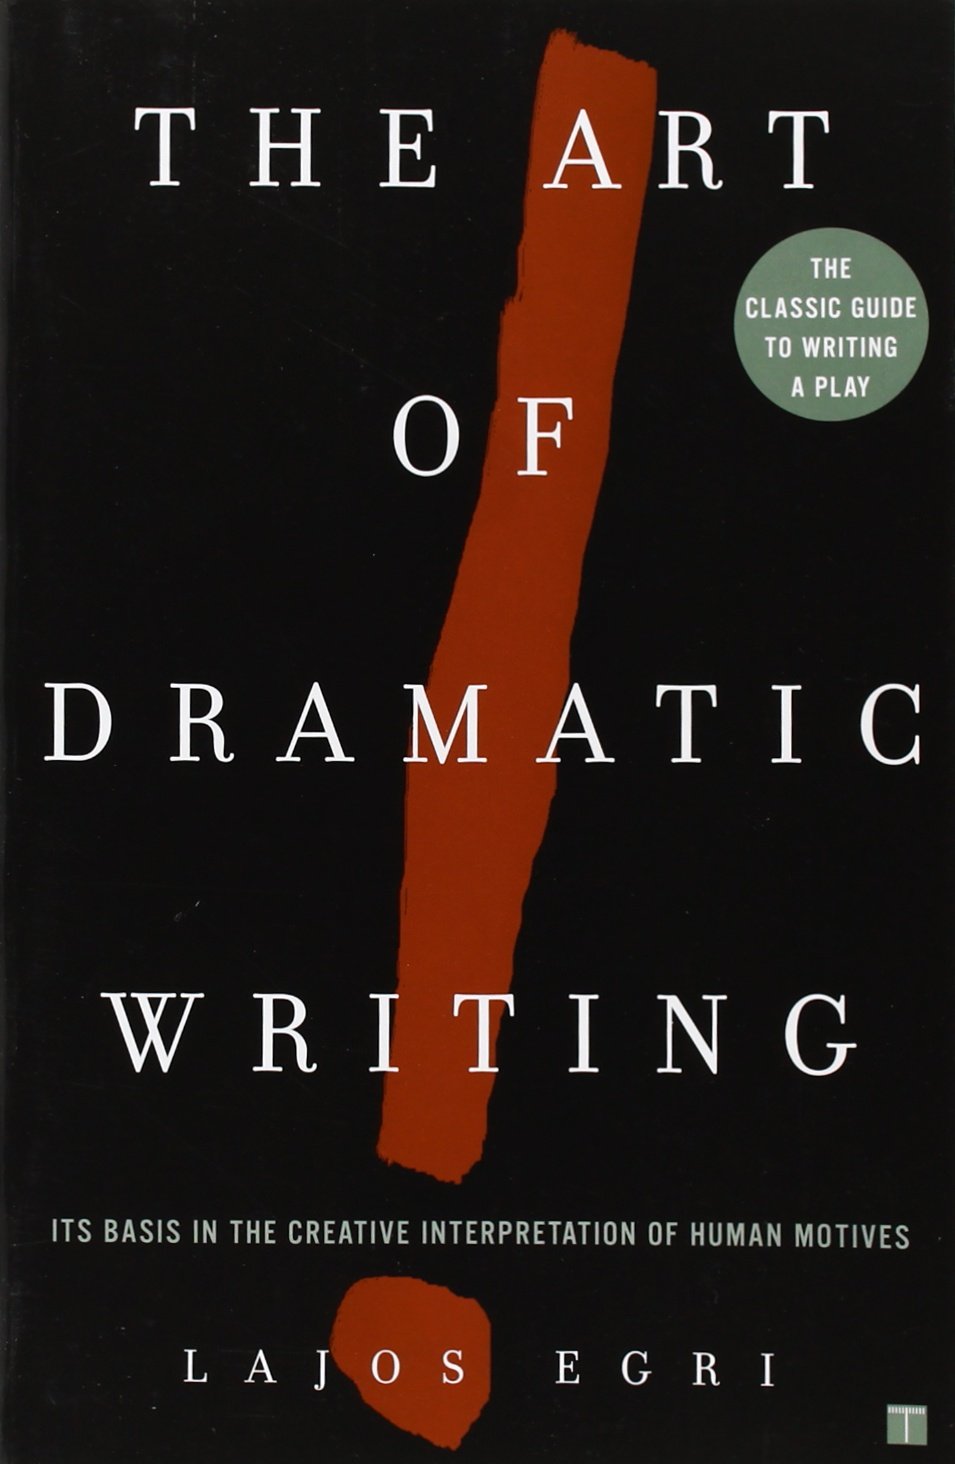 THE ART OF DRAMATIC WRITING: IT'S BASIS IN THE CREATIVE